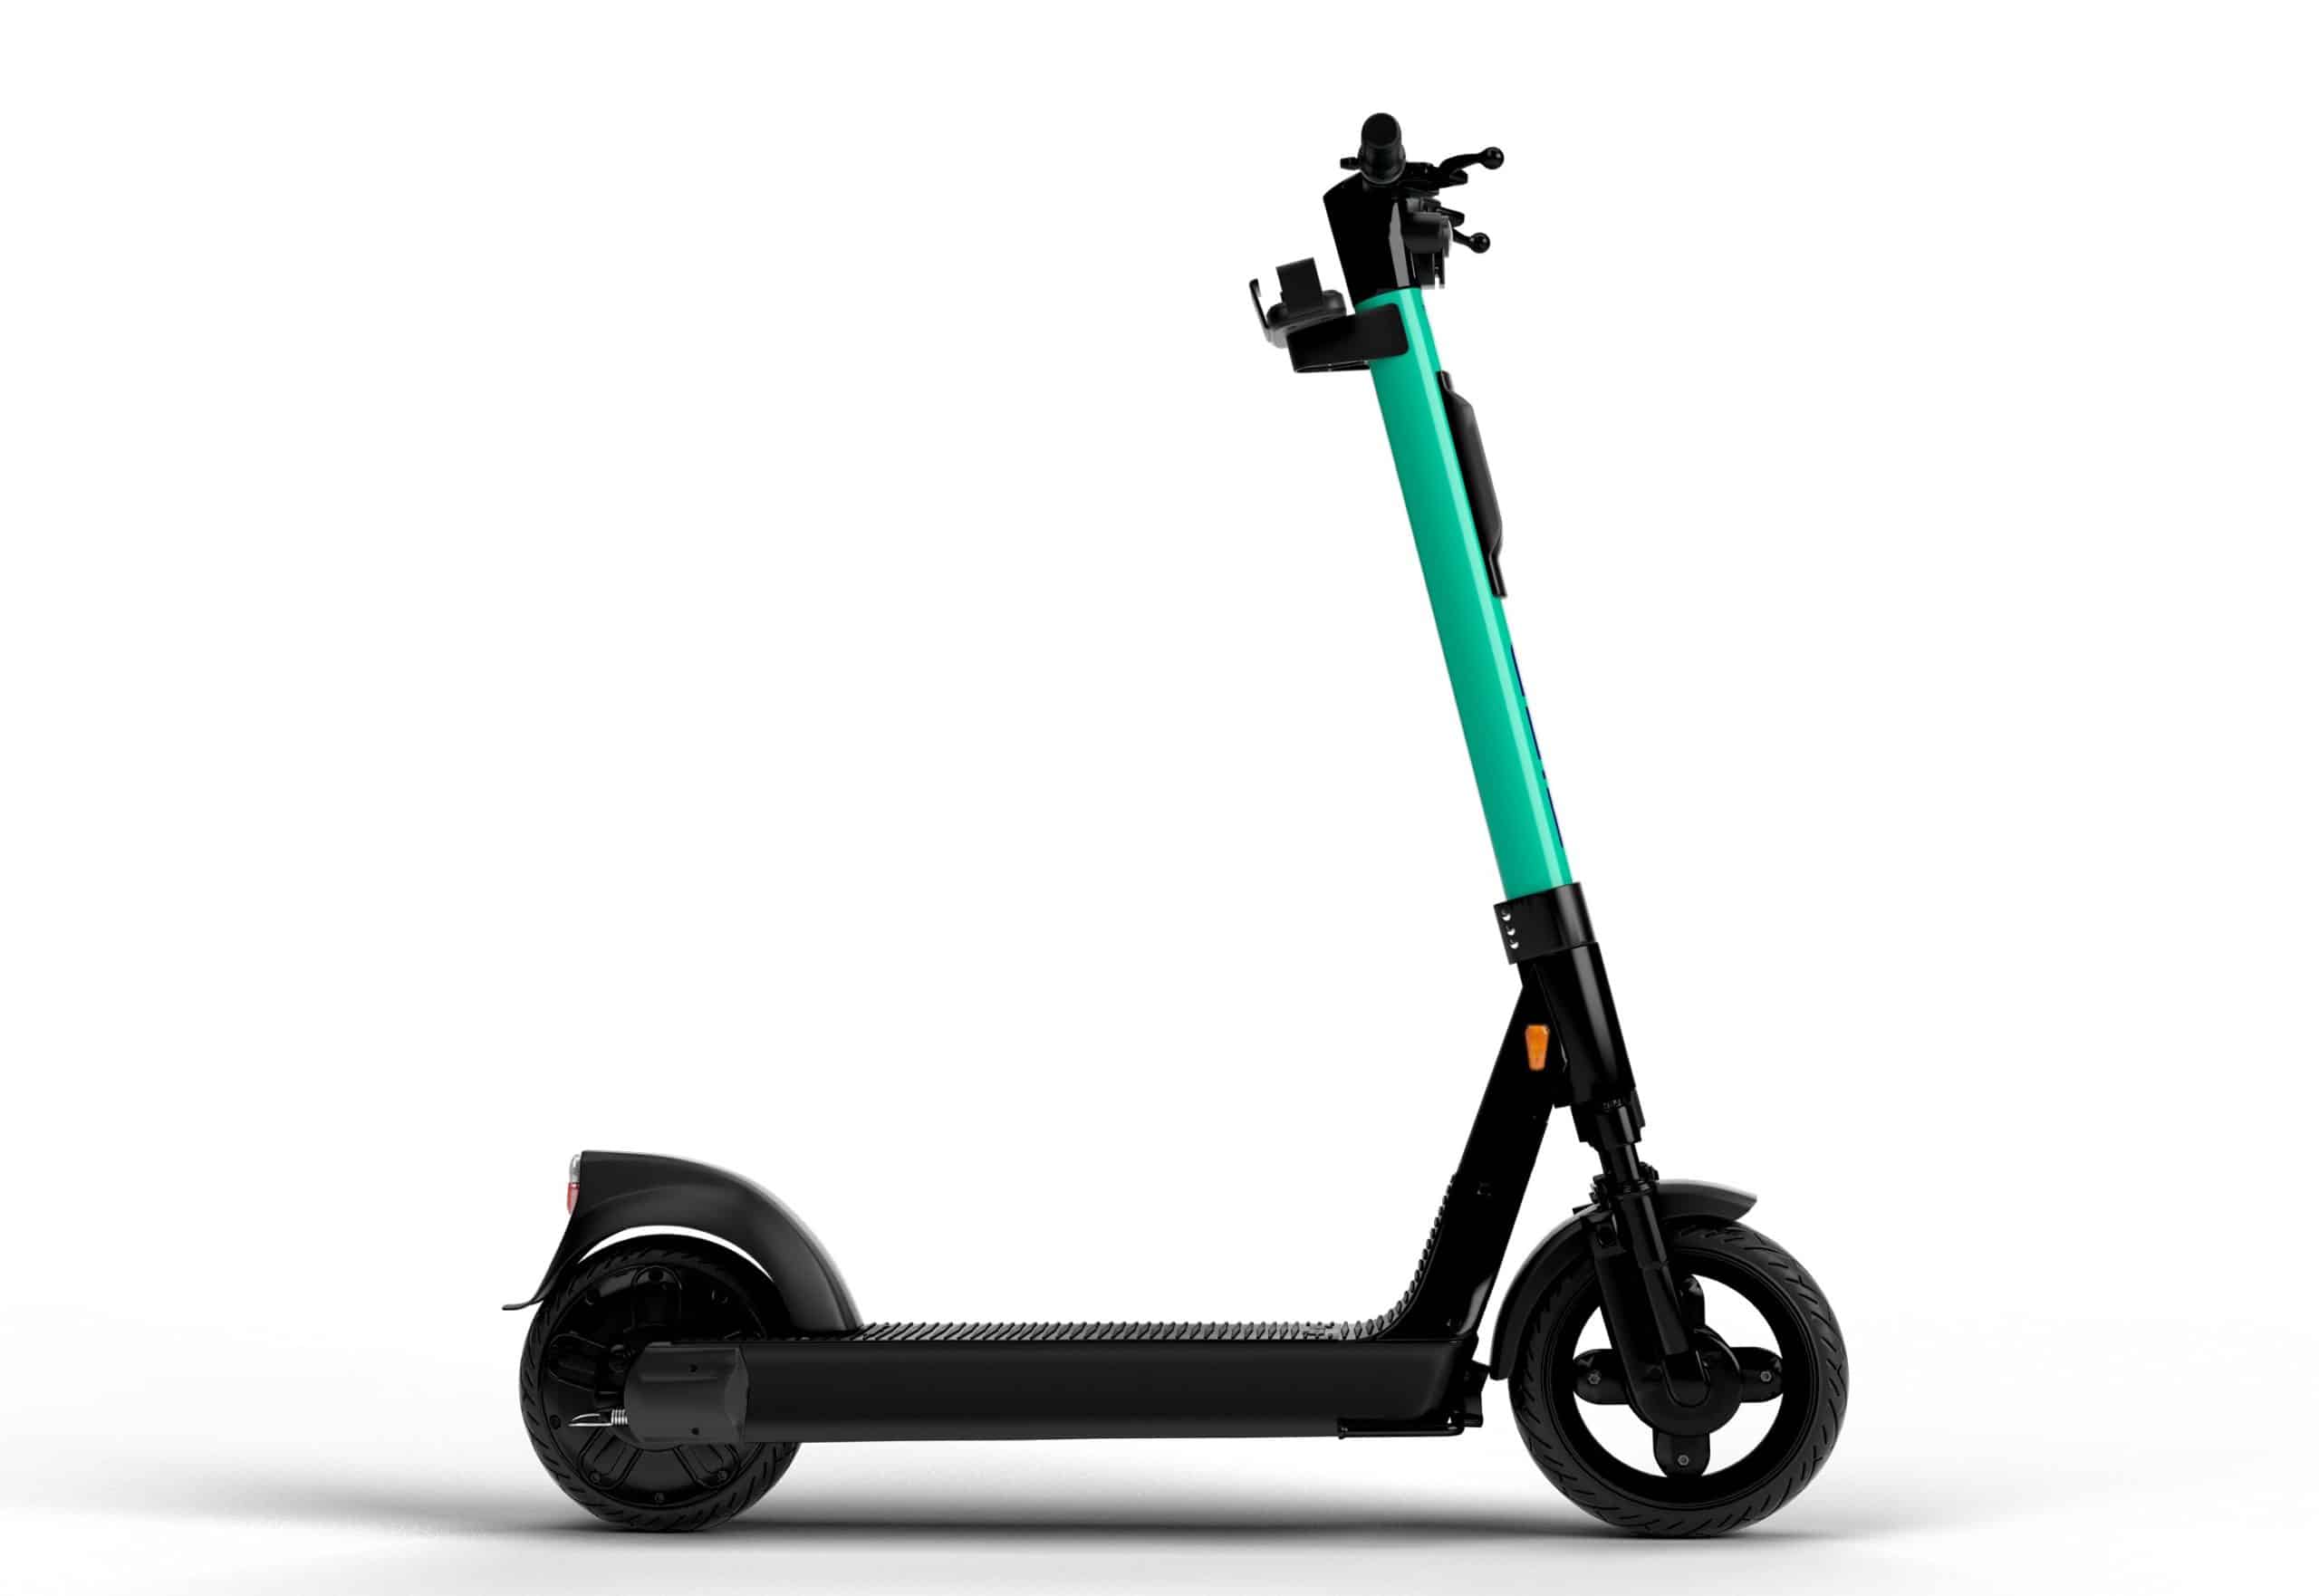 TIER Mobility X RTA Roll Out A Fleet of E-Scooters Across Dubai 